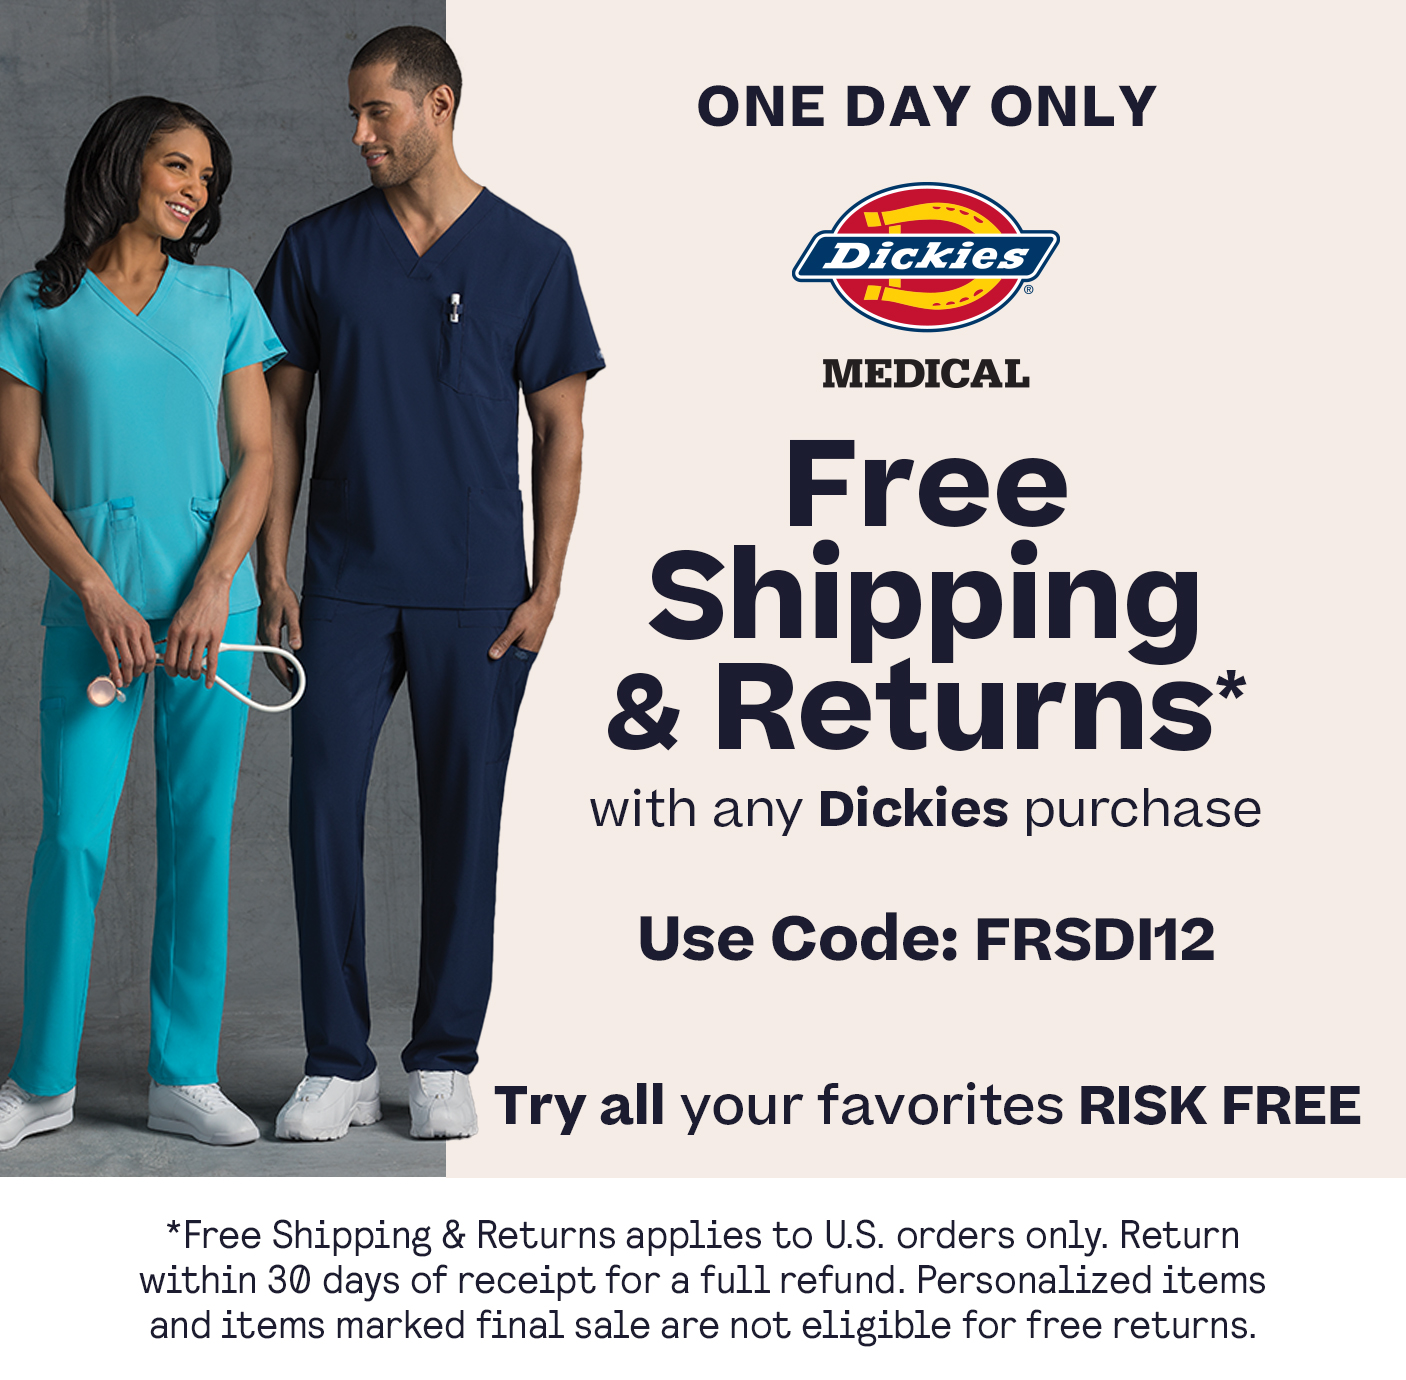 Free U.S. Shipping & Returns on Dickies One Day Only CODE: FRSDI12